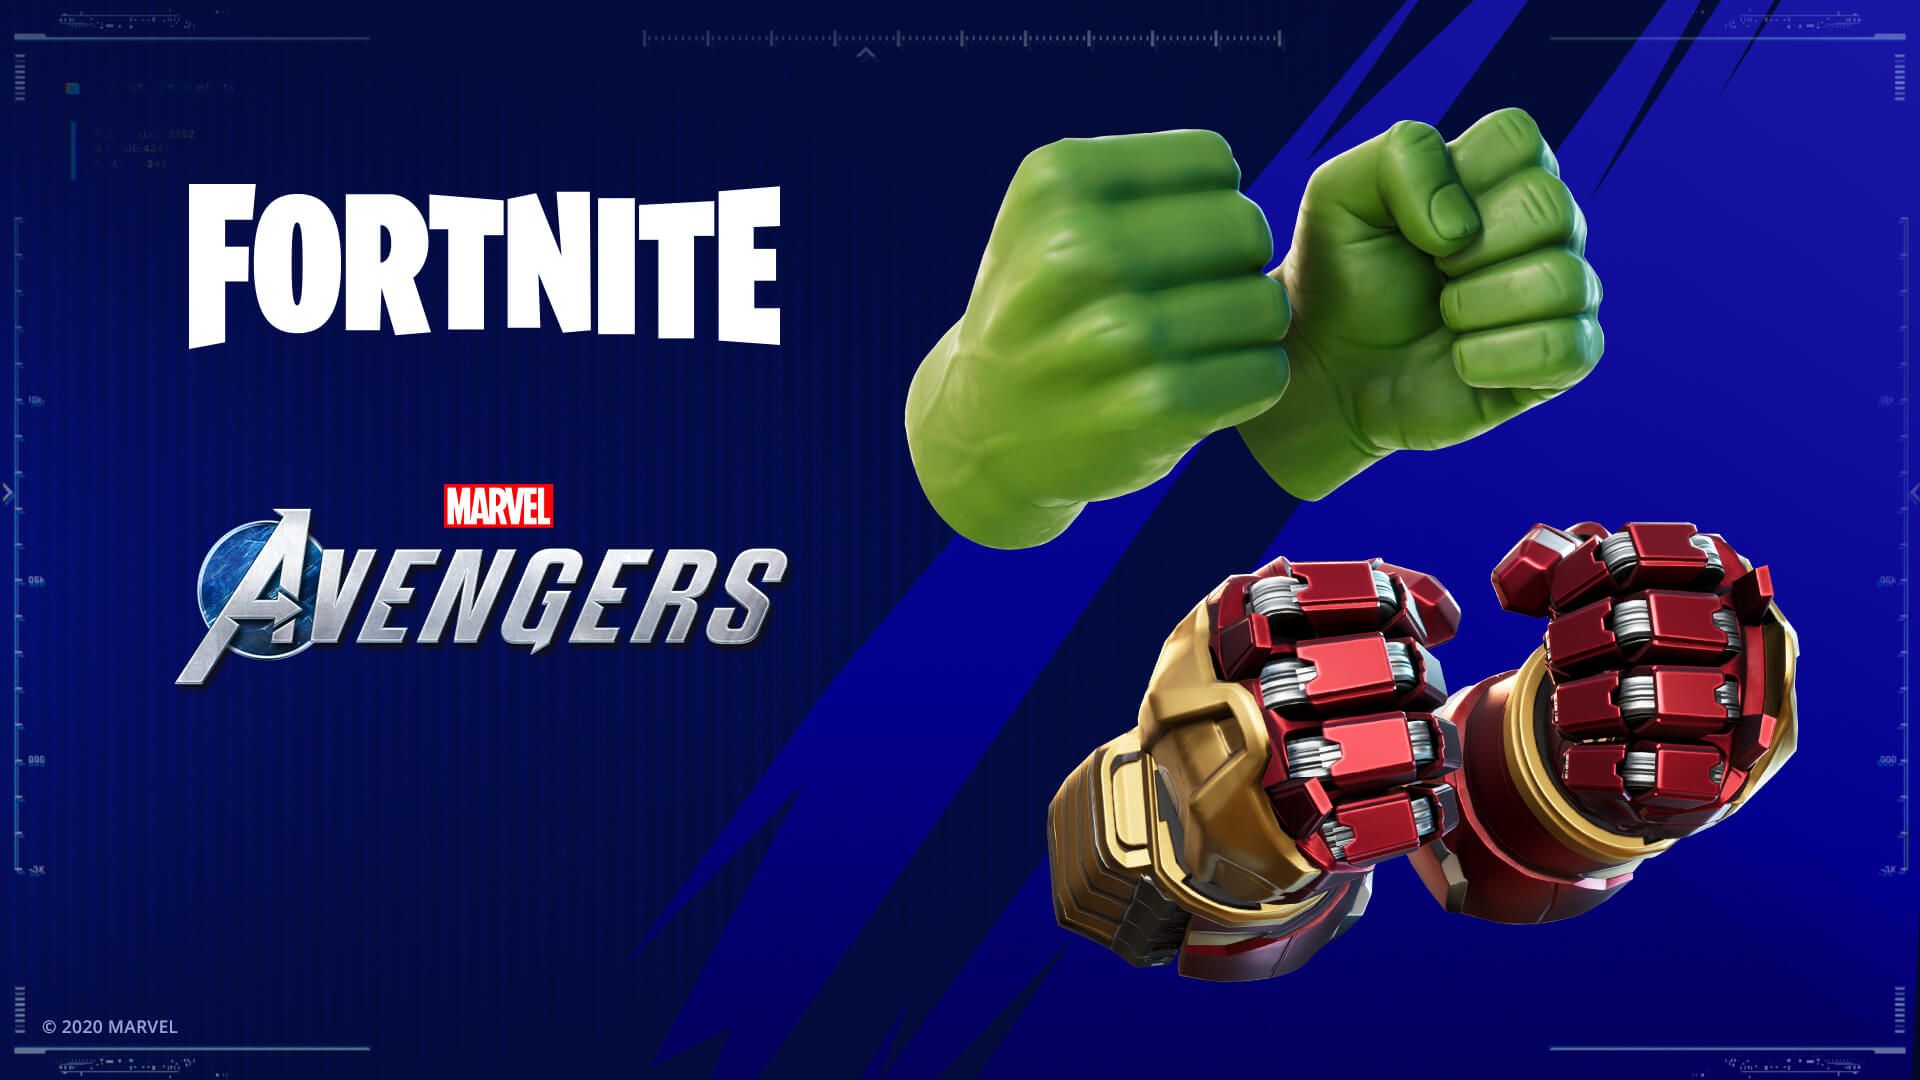 Play The Marvel's Avengers PS4 Beta And Unlock Special Fortnite Content